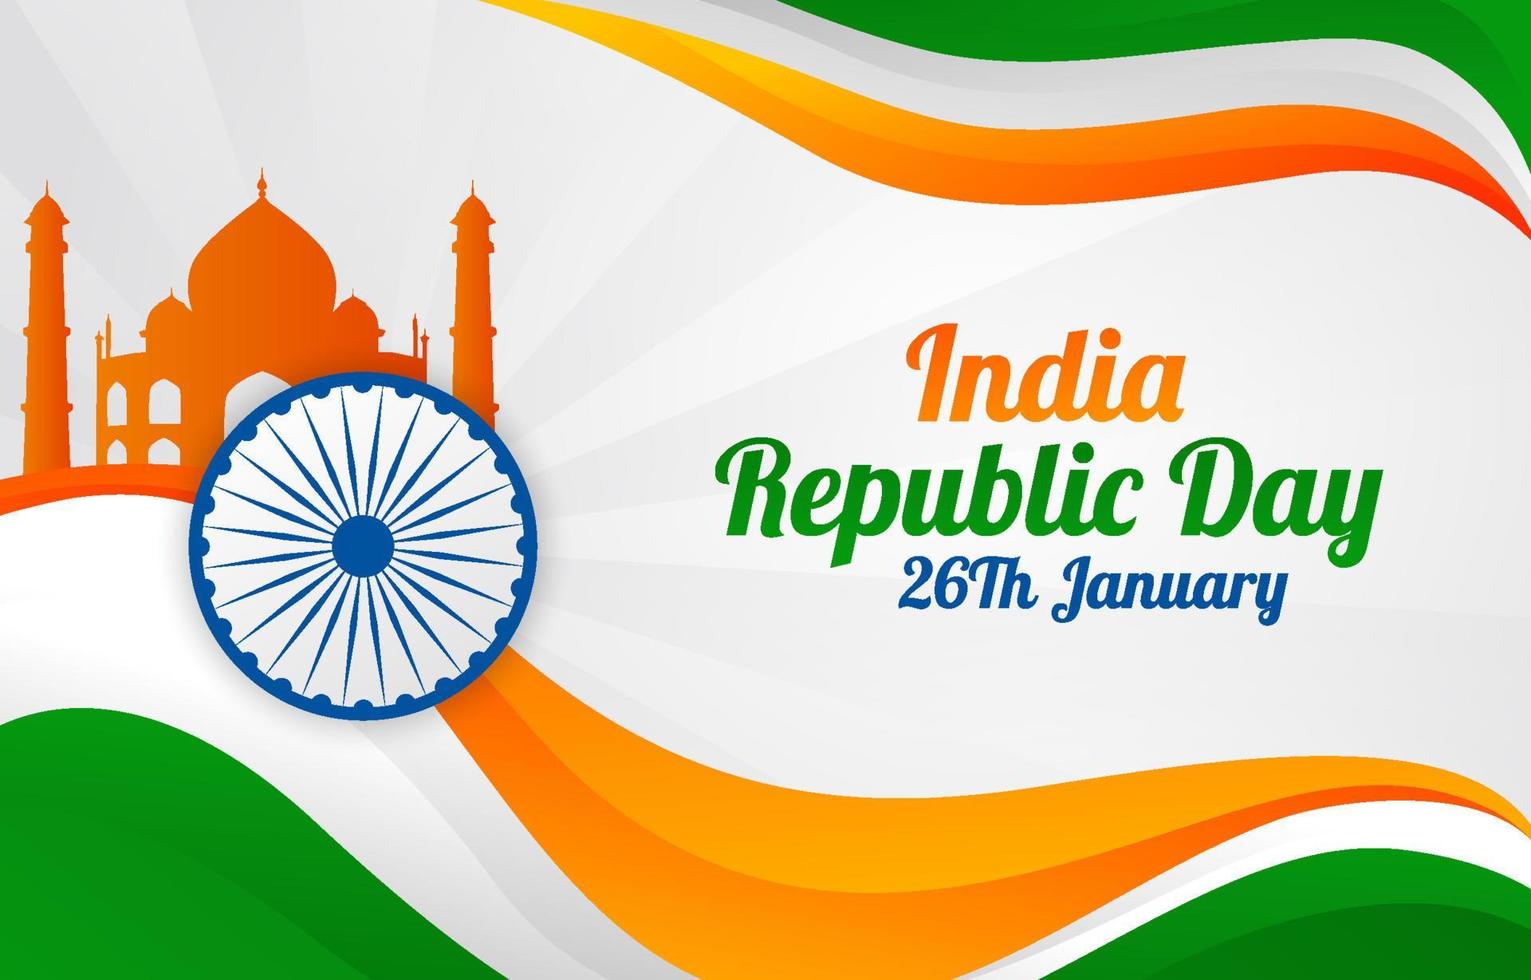 Background of India Republic Day vector